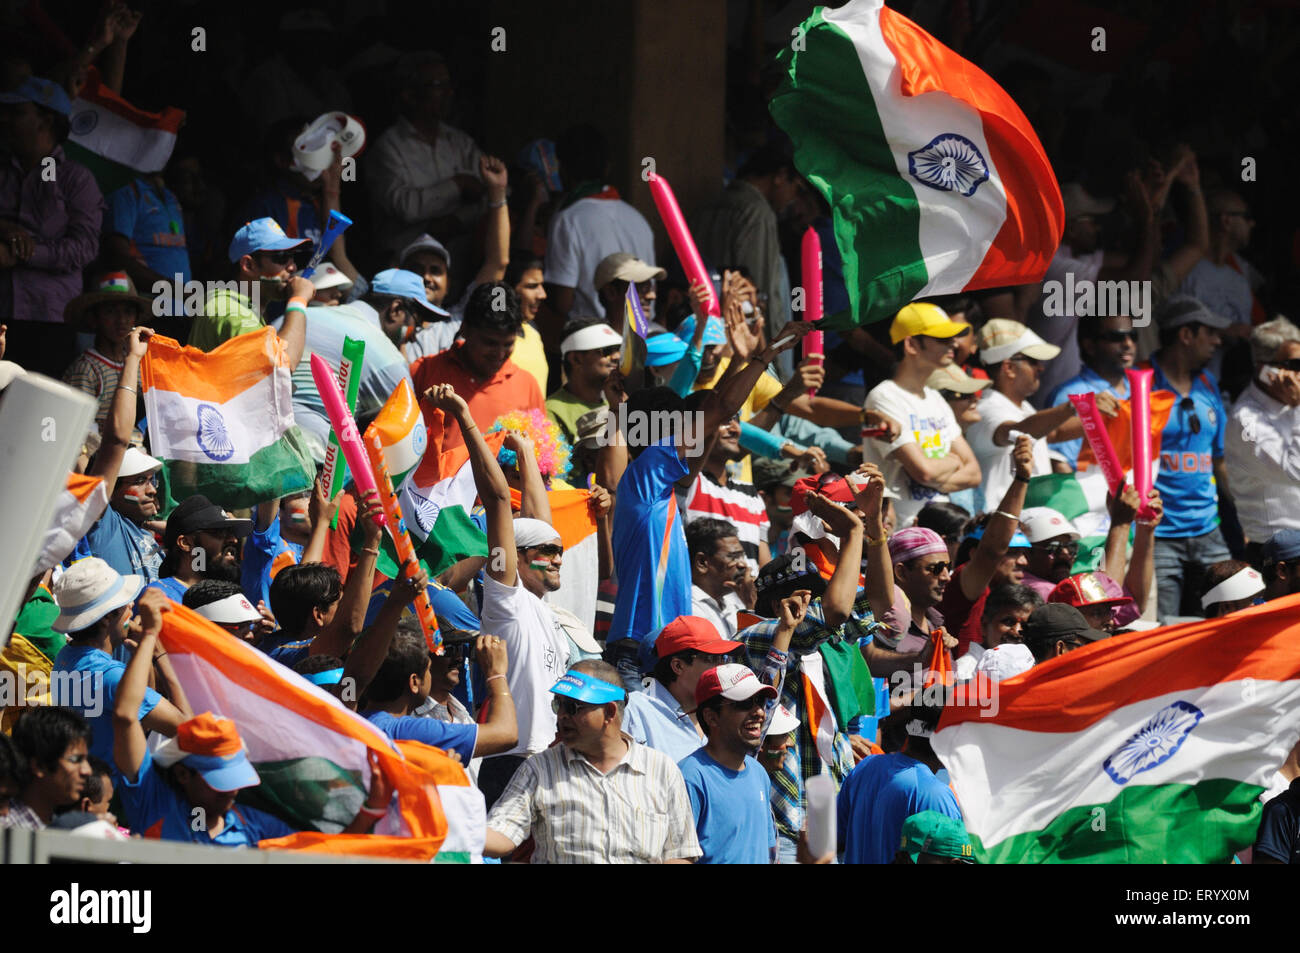 Fans Welle Nationalflaggen ICC Cricket World Cup Wankhede Stadium am 2. April 2011 in Mumbai Stockfoto